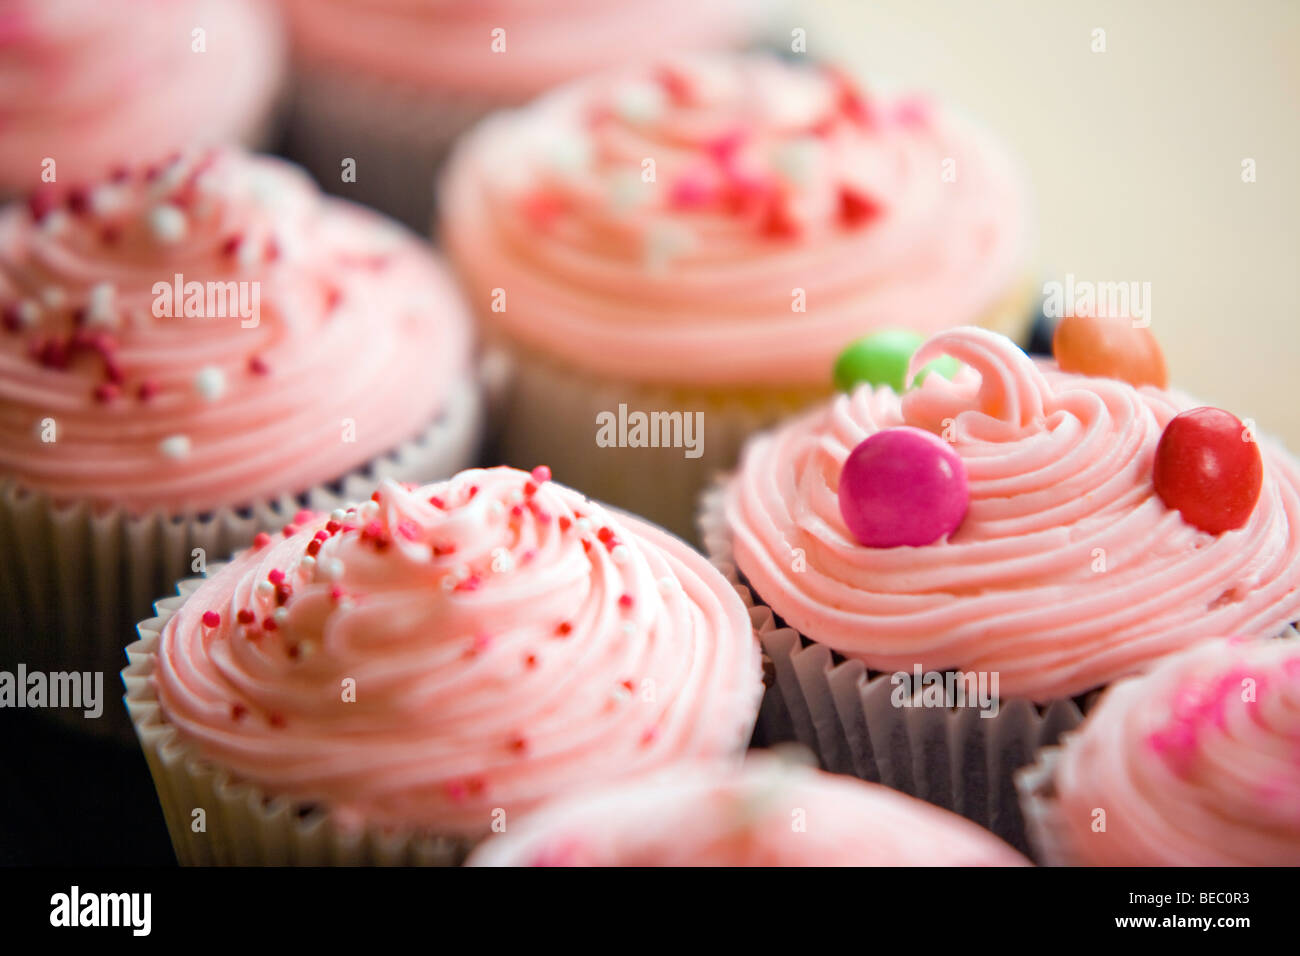 Cup cakes Stock Photo